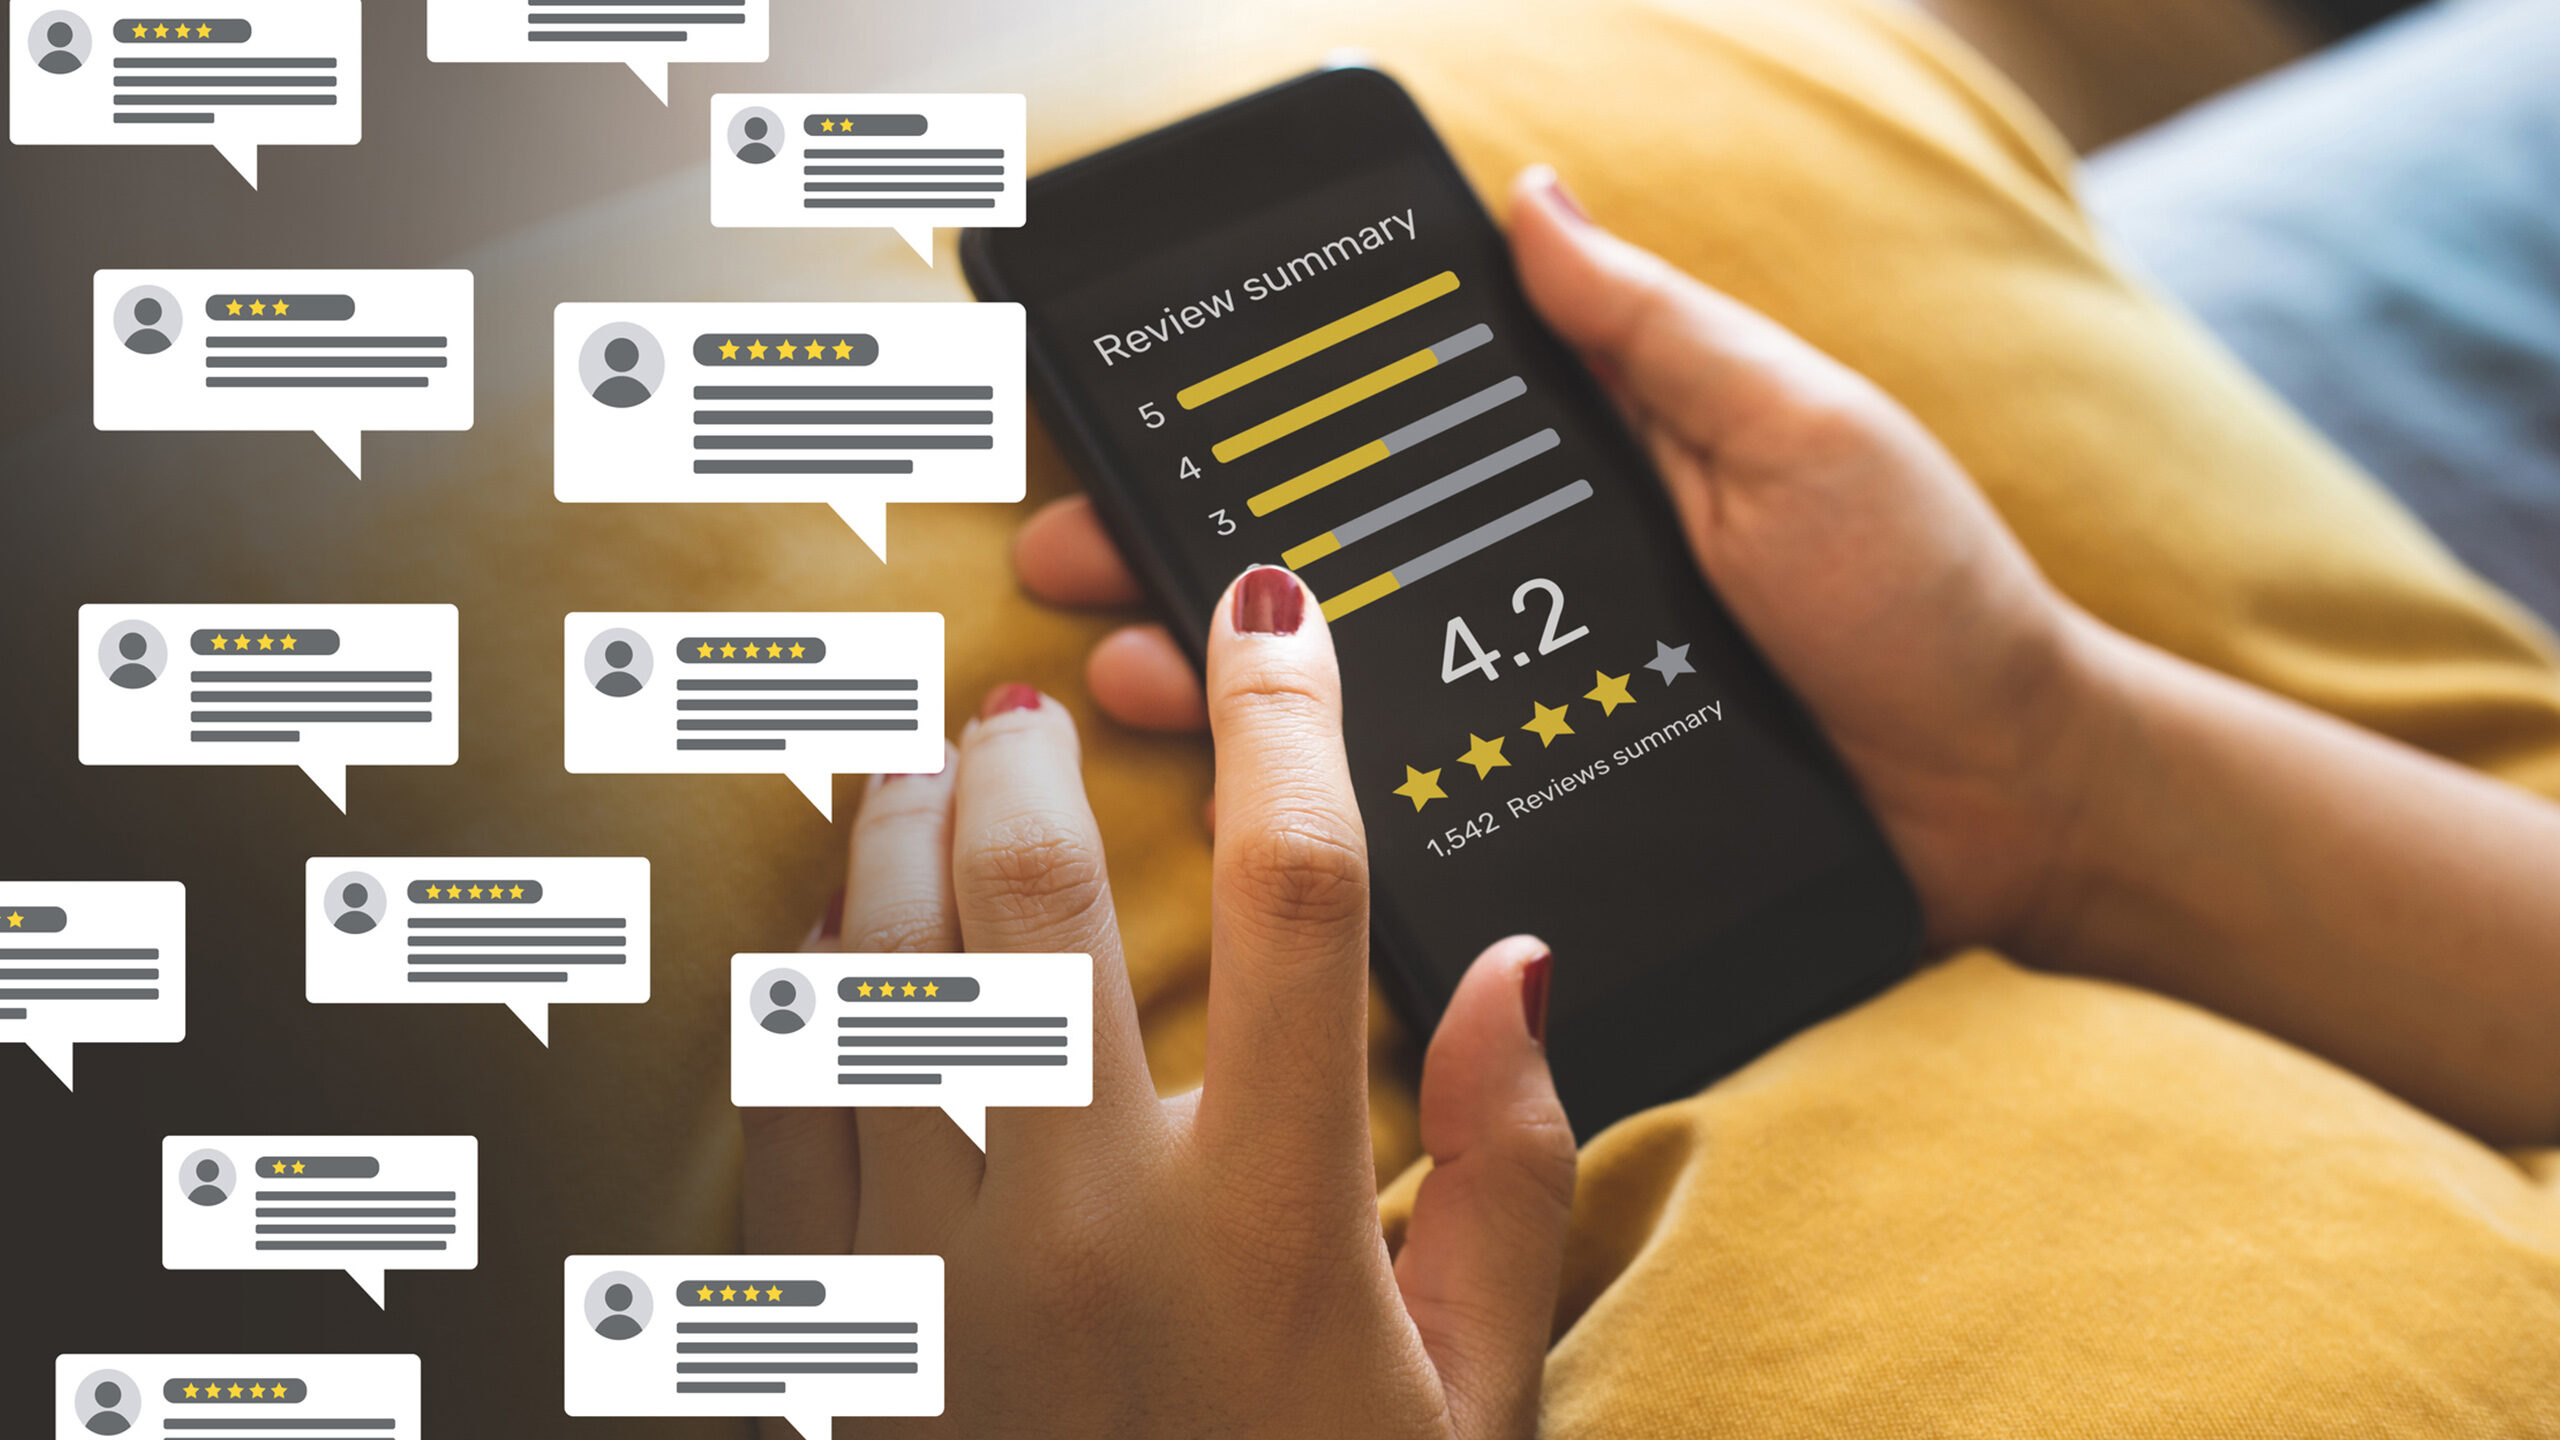 6 ways Reviews & Ratings can Skyrocket your eCommerce sales